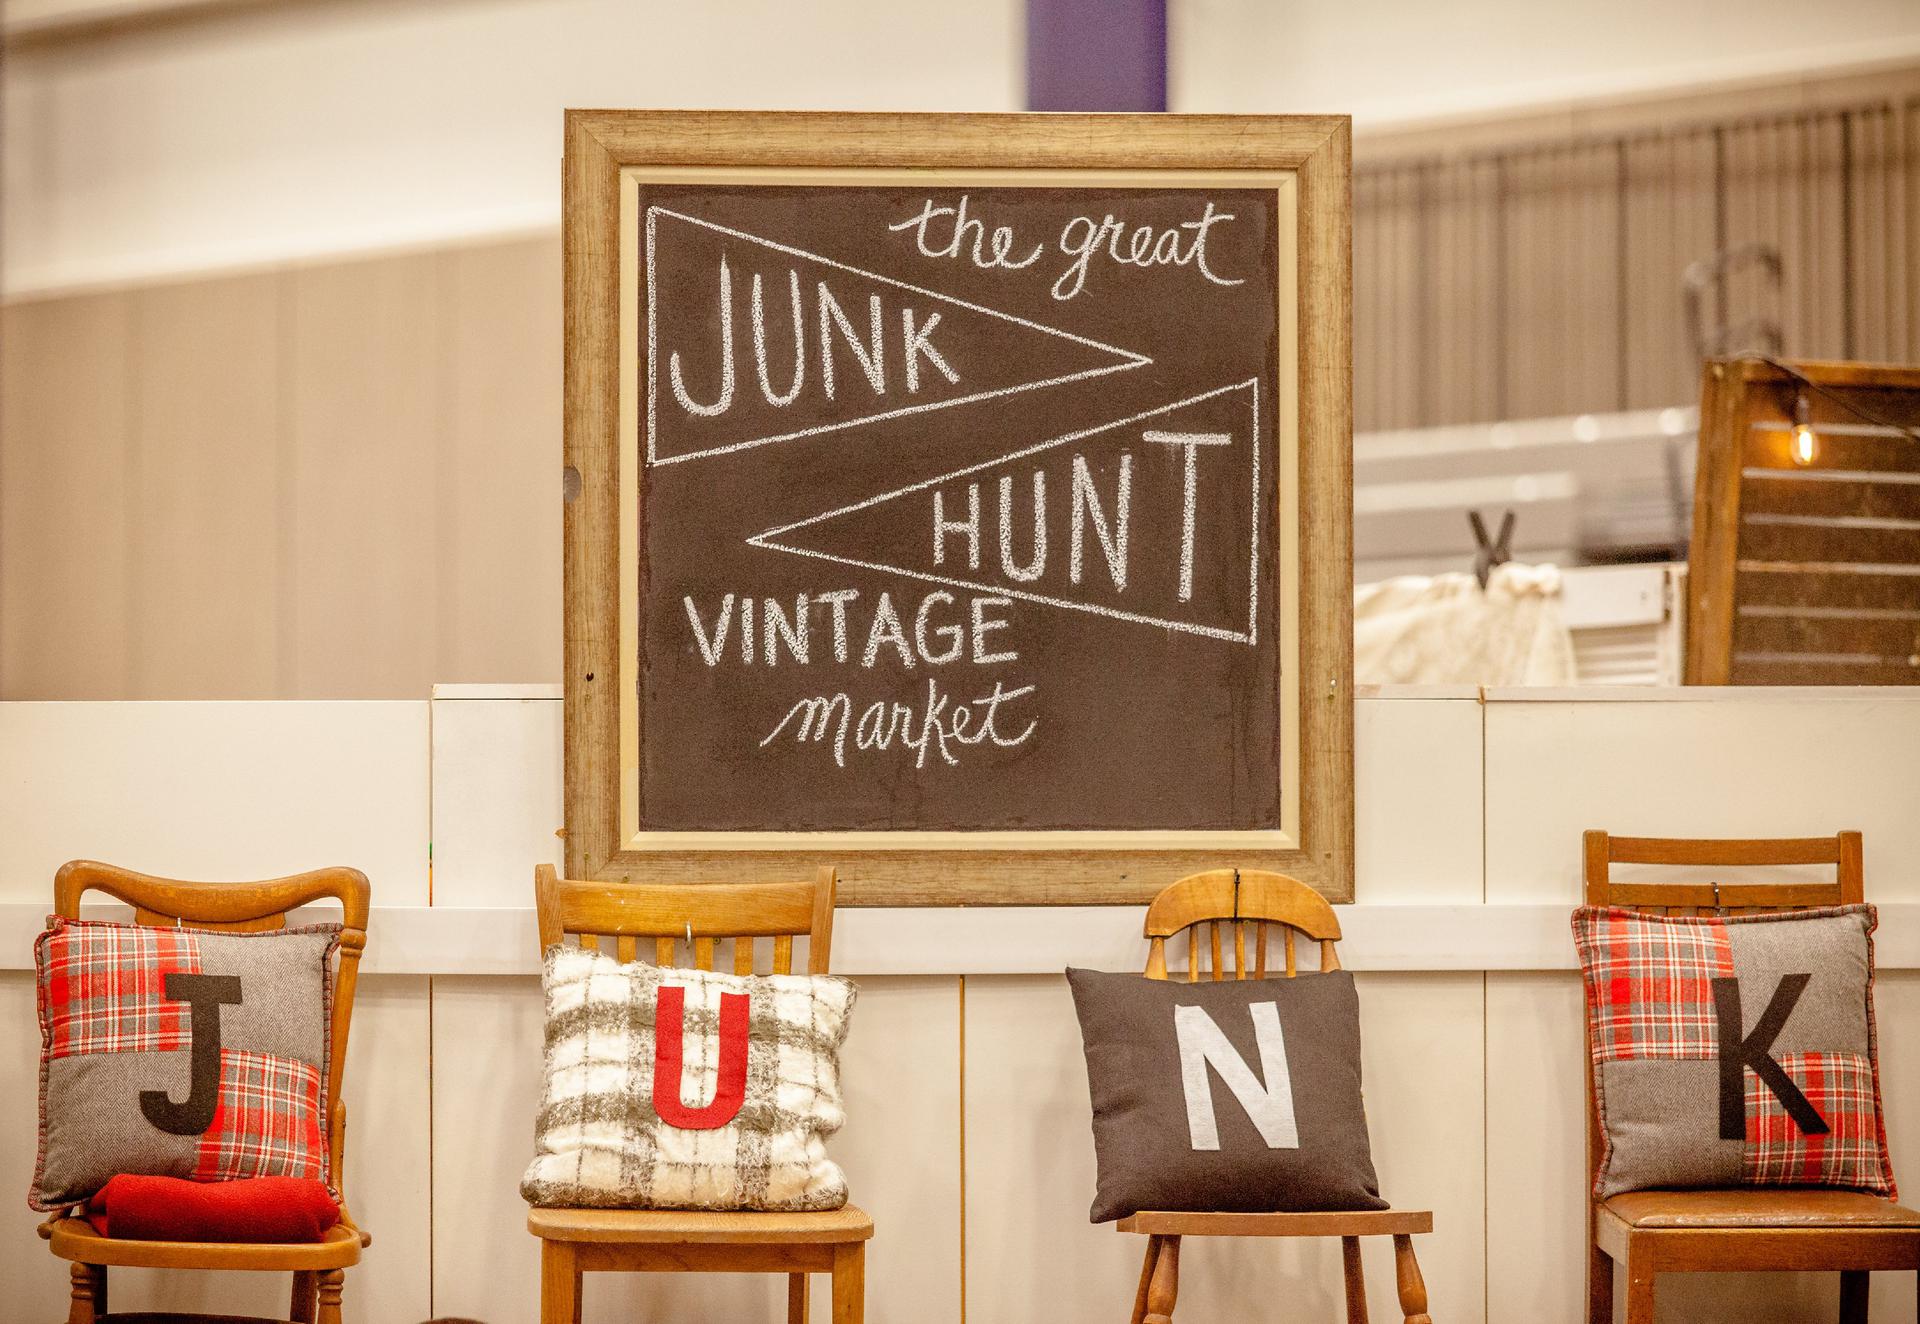 The Great Junk Hunt @the Grounds